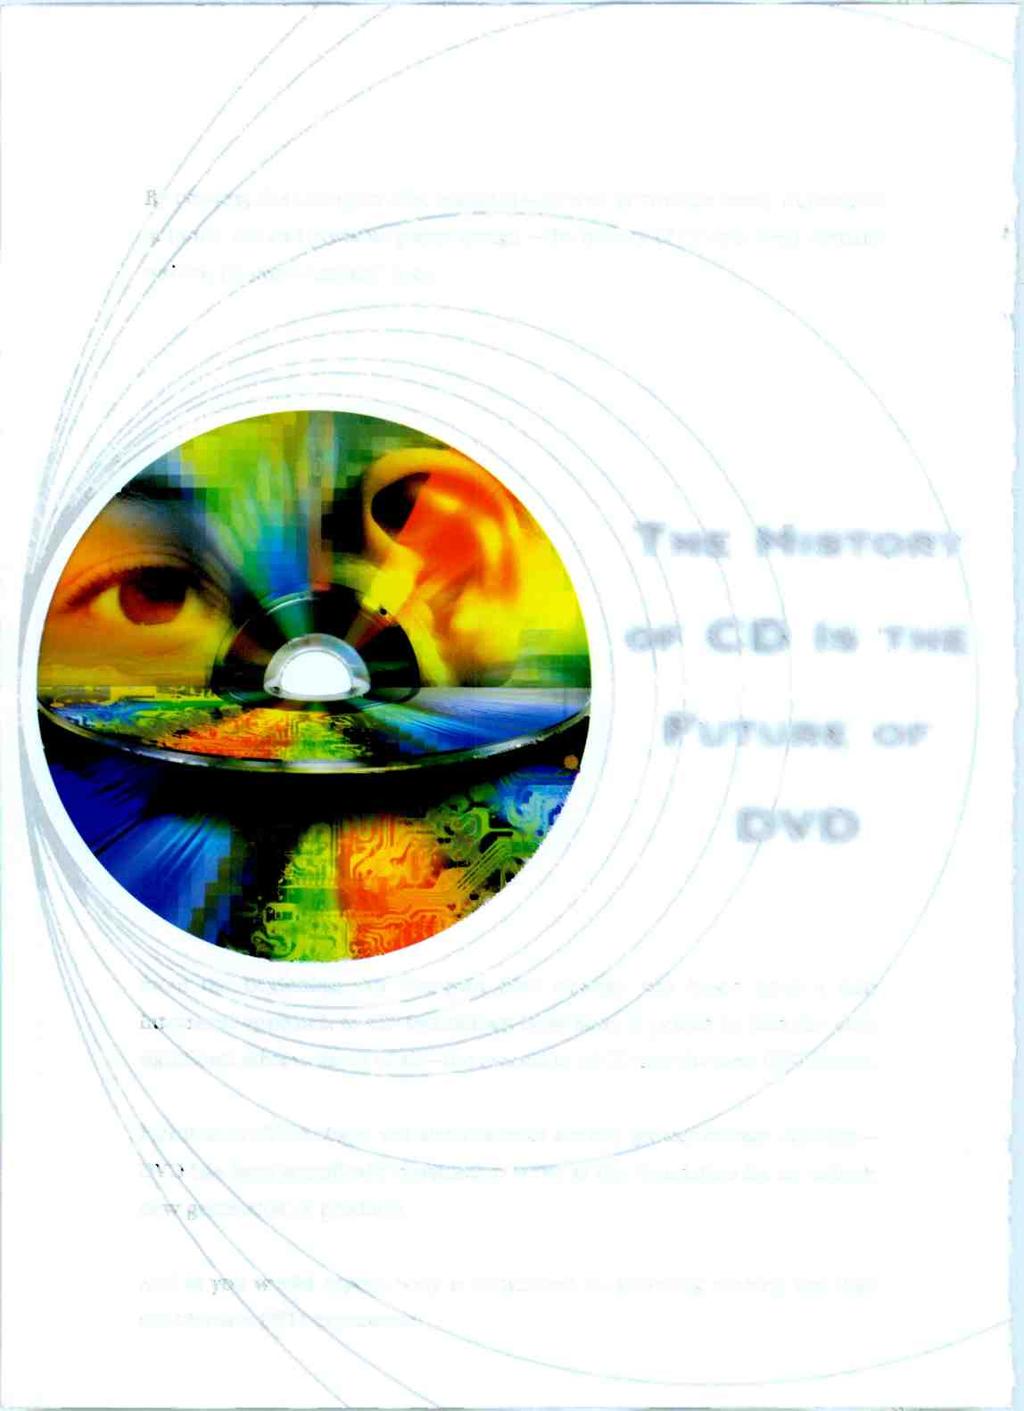 By creating the Compact Disc standard-as well as virtually every innovation in home, car and portable player design-the